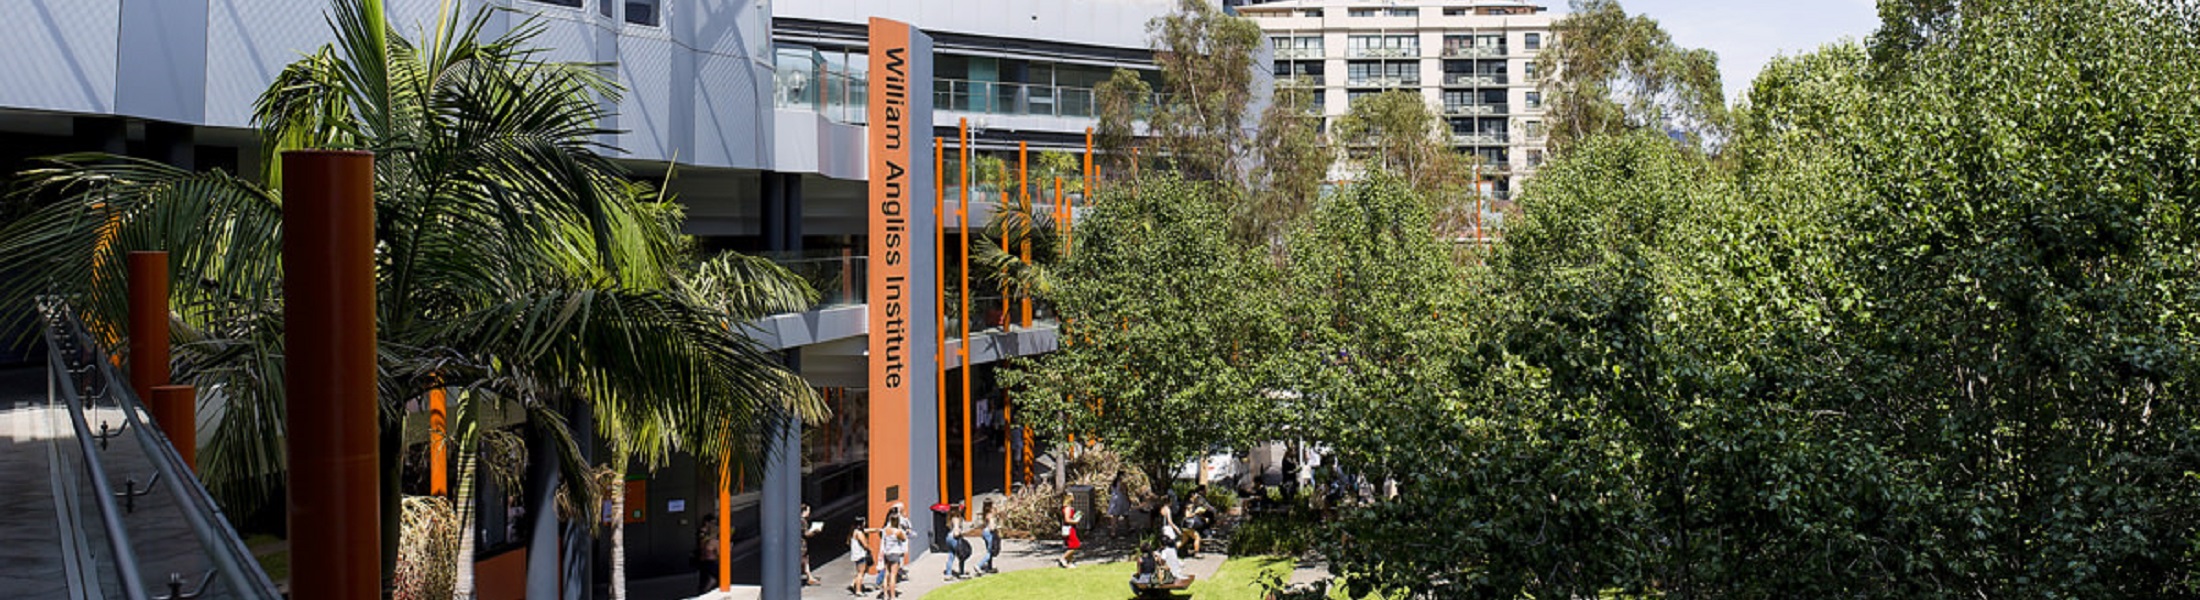 banner for William Angliss Institute